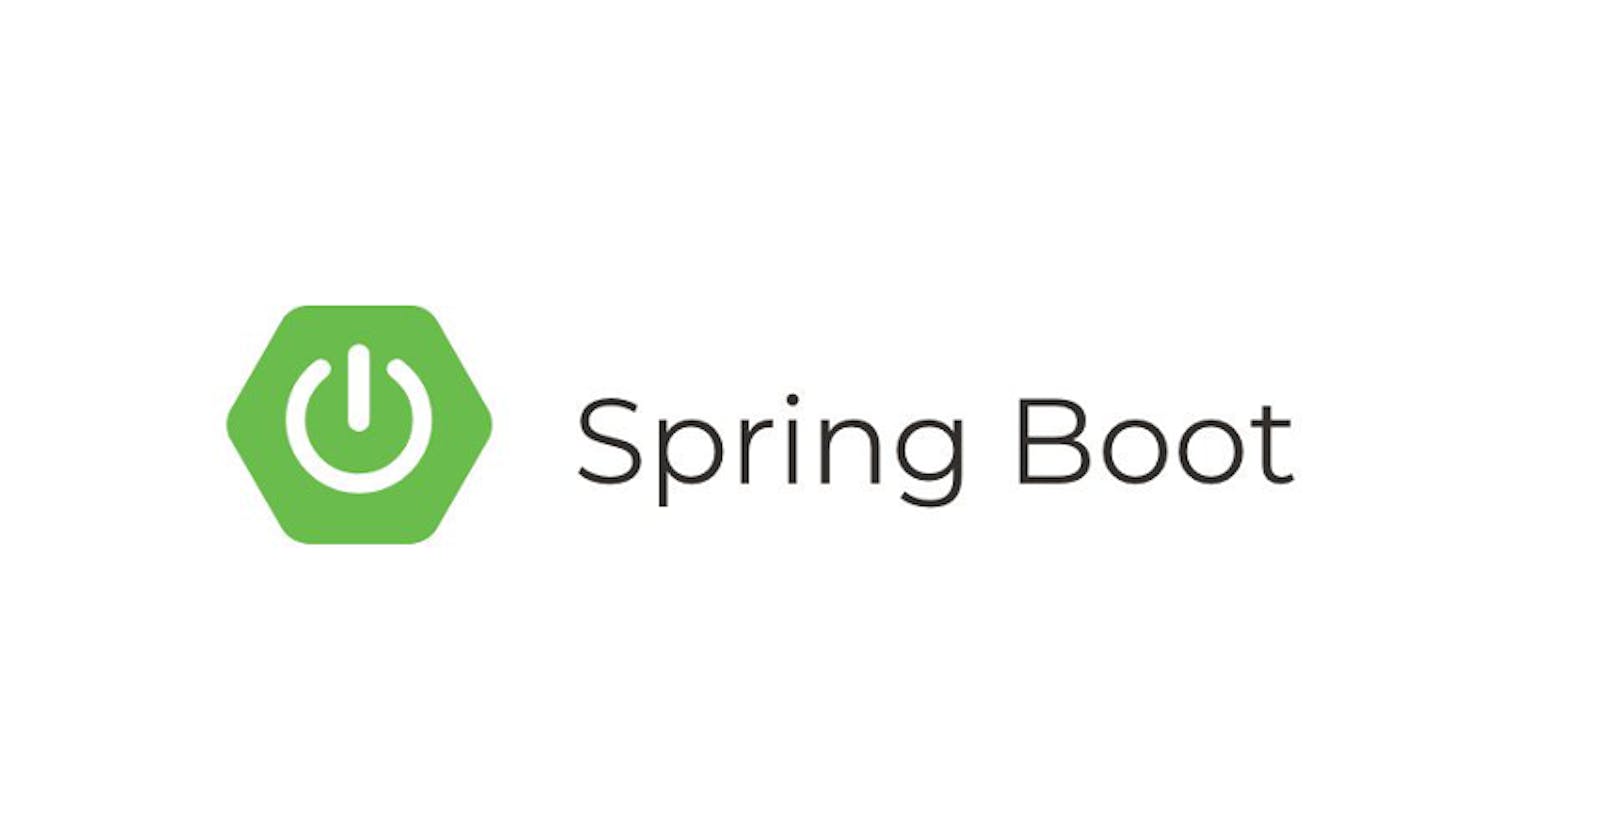 Spring Boot🔥
Do i need to study in 2022 to get a Job?🤔